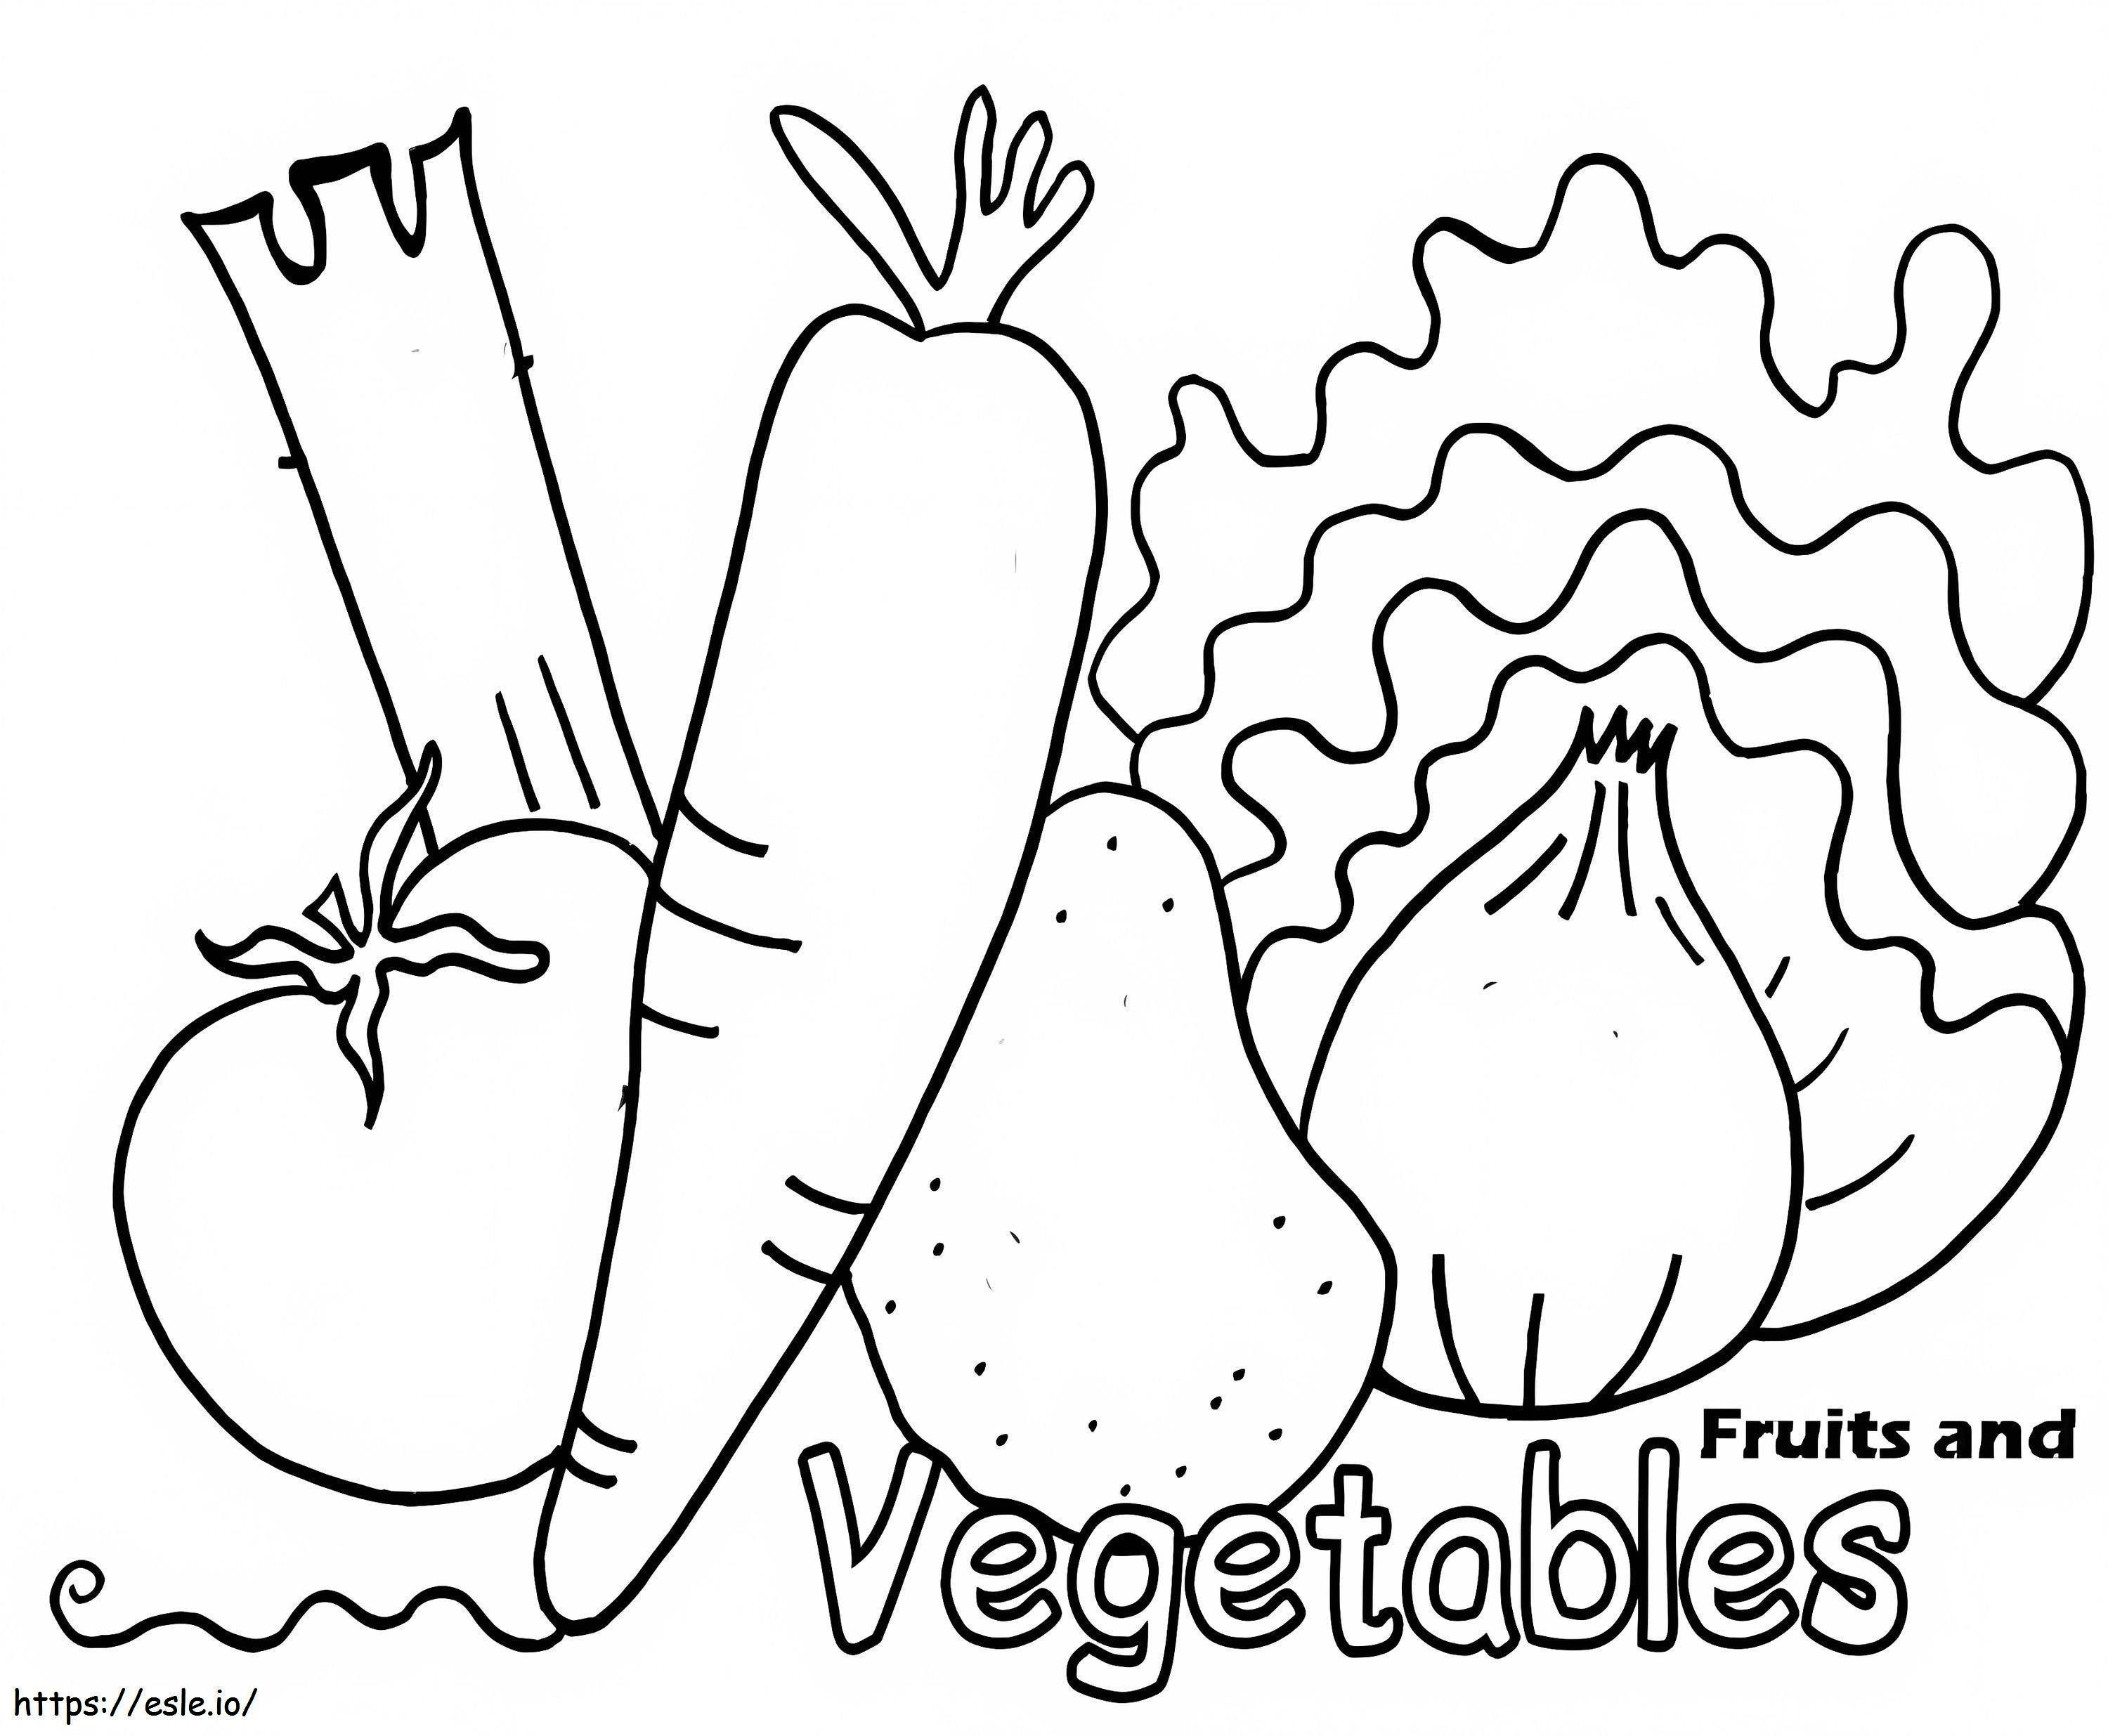 Fruit And Vegetable coloring page